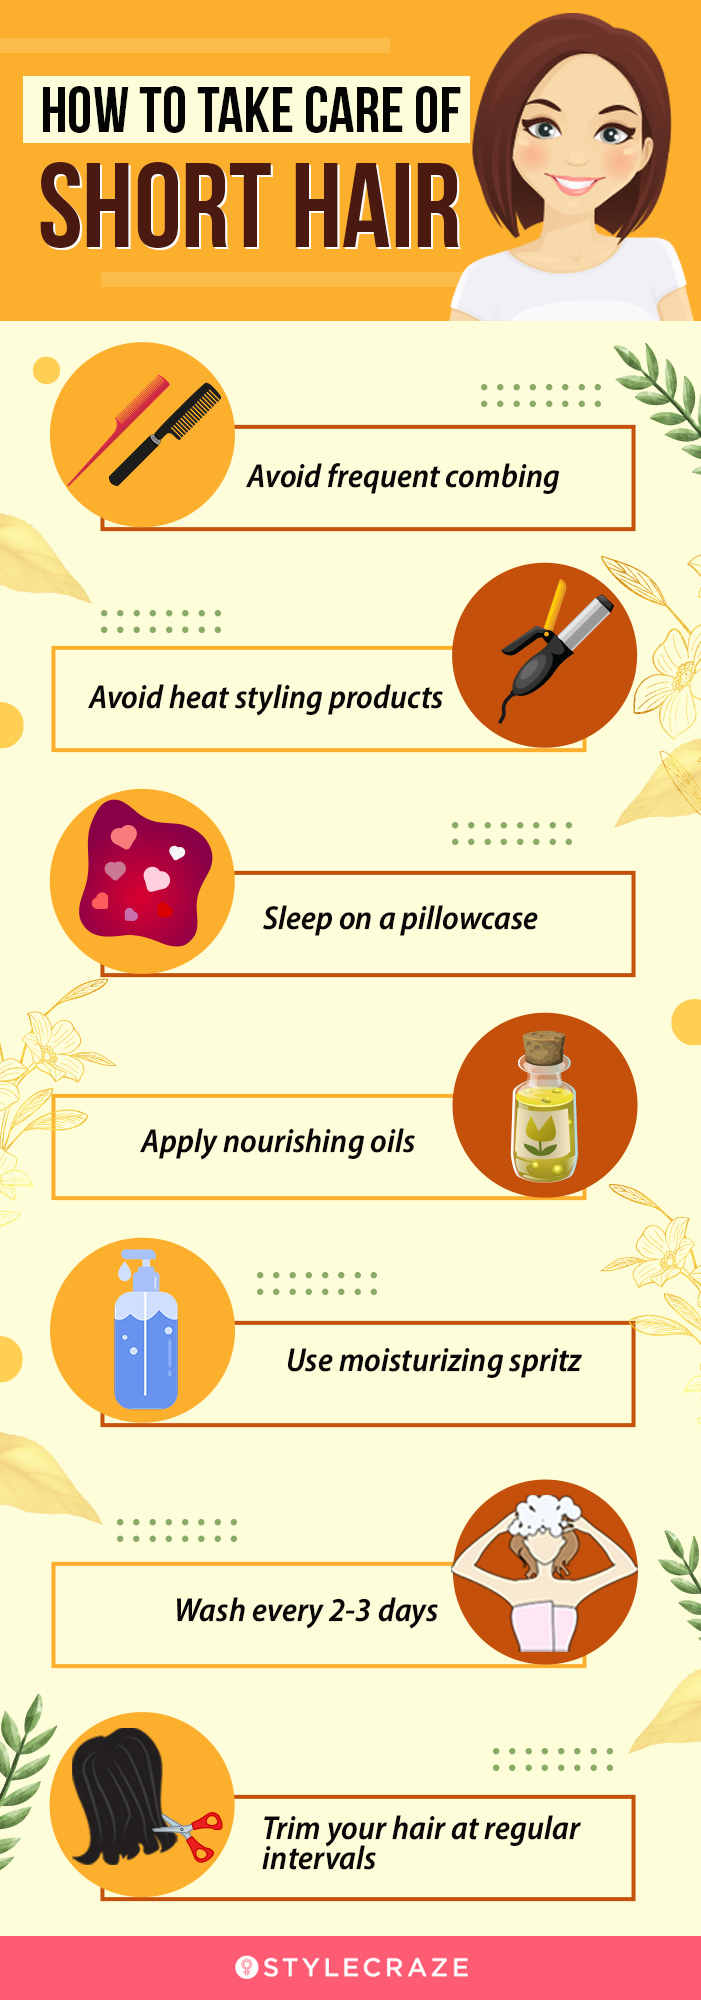 how to take care of short hair [infographic]